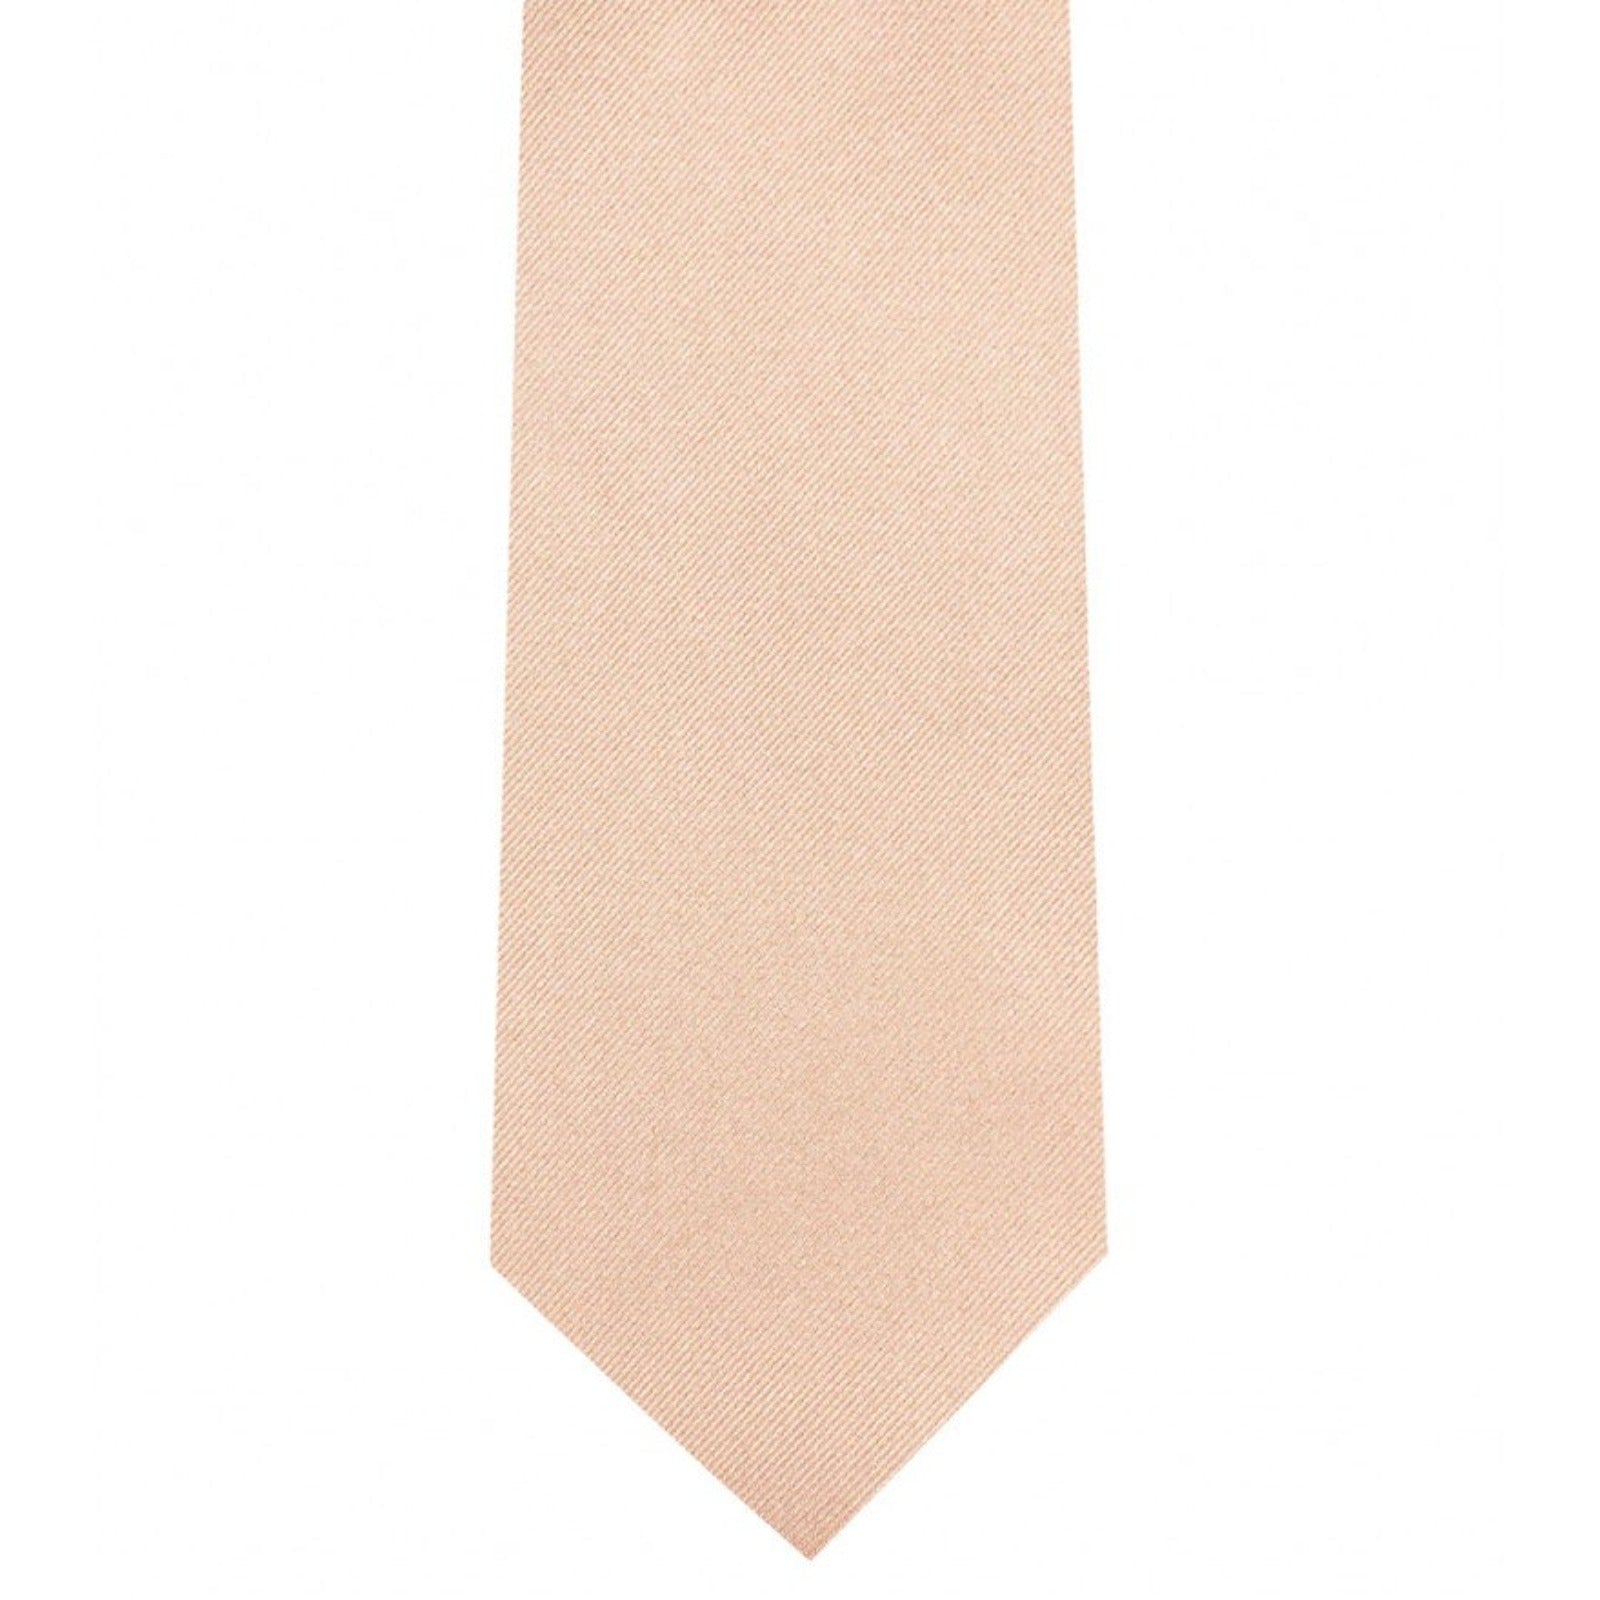 Classic Blush Tie Ultra Skinny tie width 2.25 inches With Matching Pocket Square | KCT Menswear